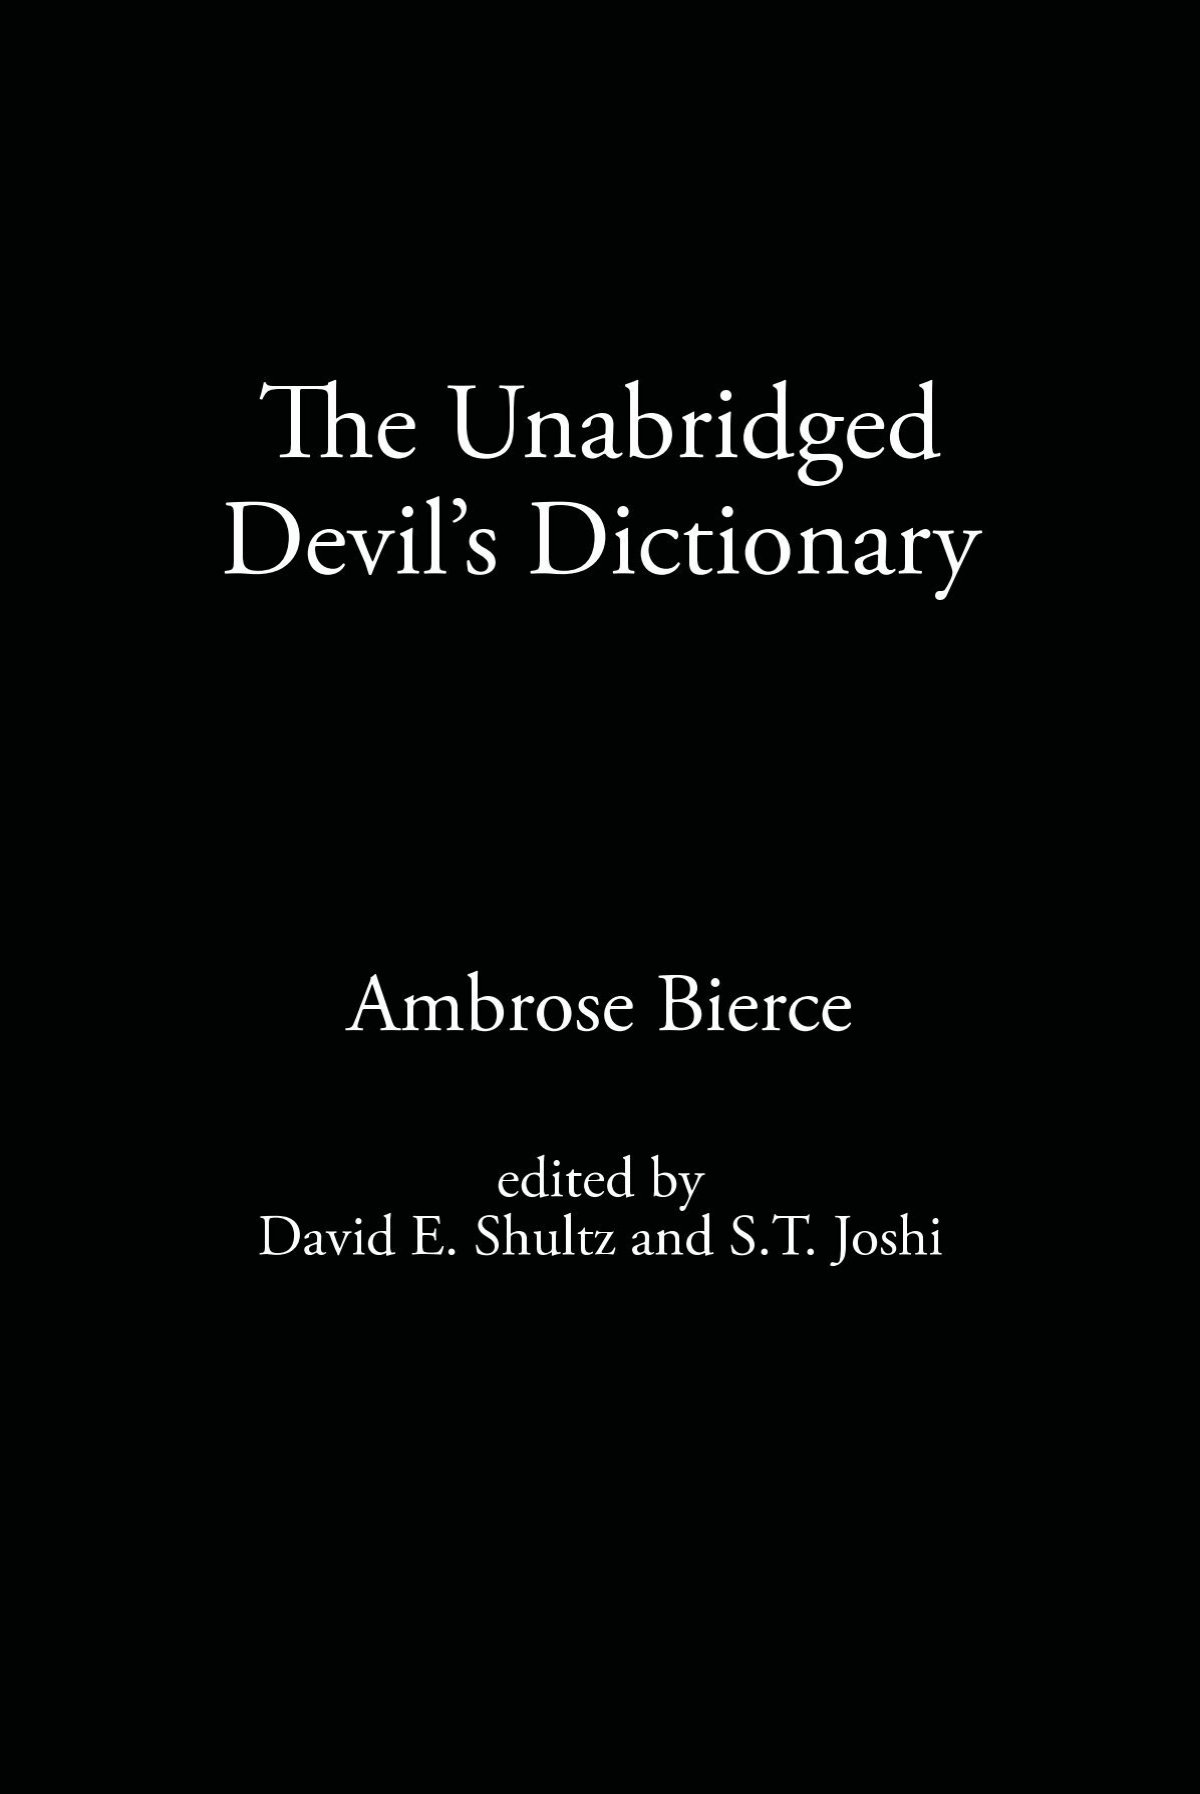 The Unabridged Devil's Dictionary - Blogs@Baruch